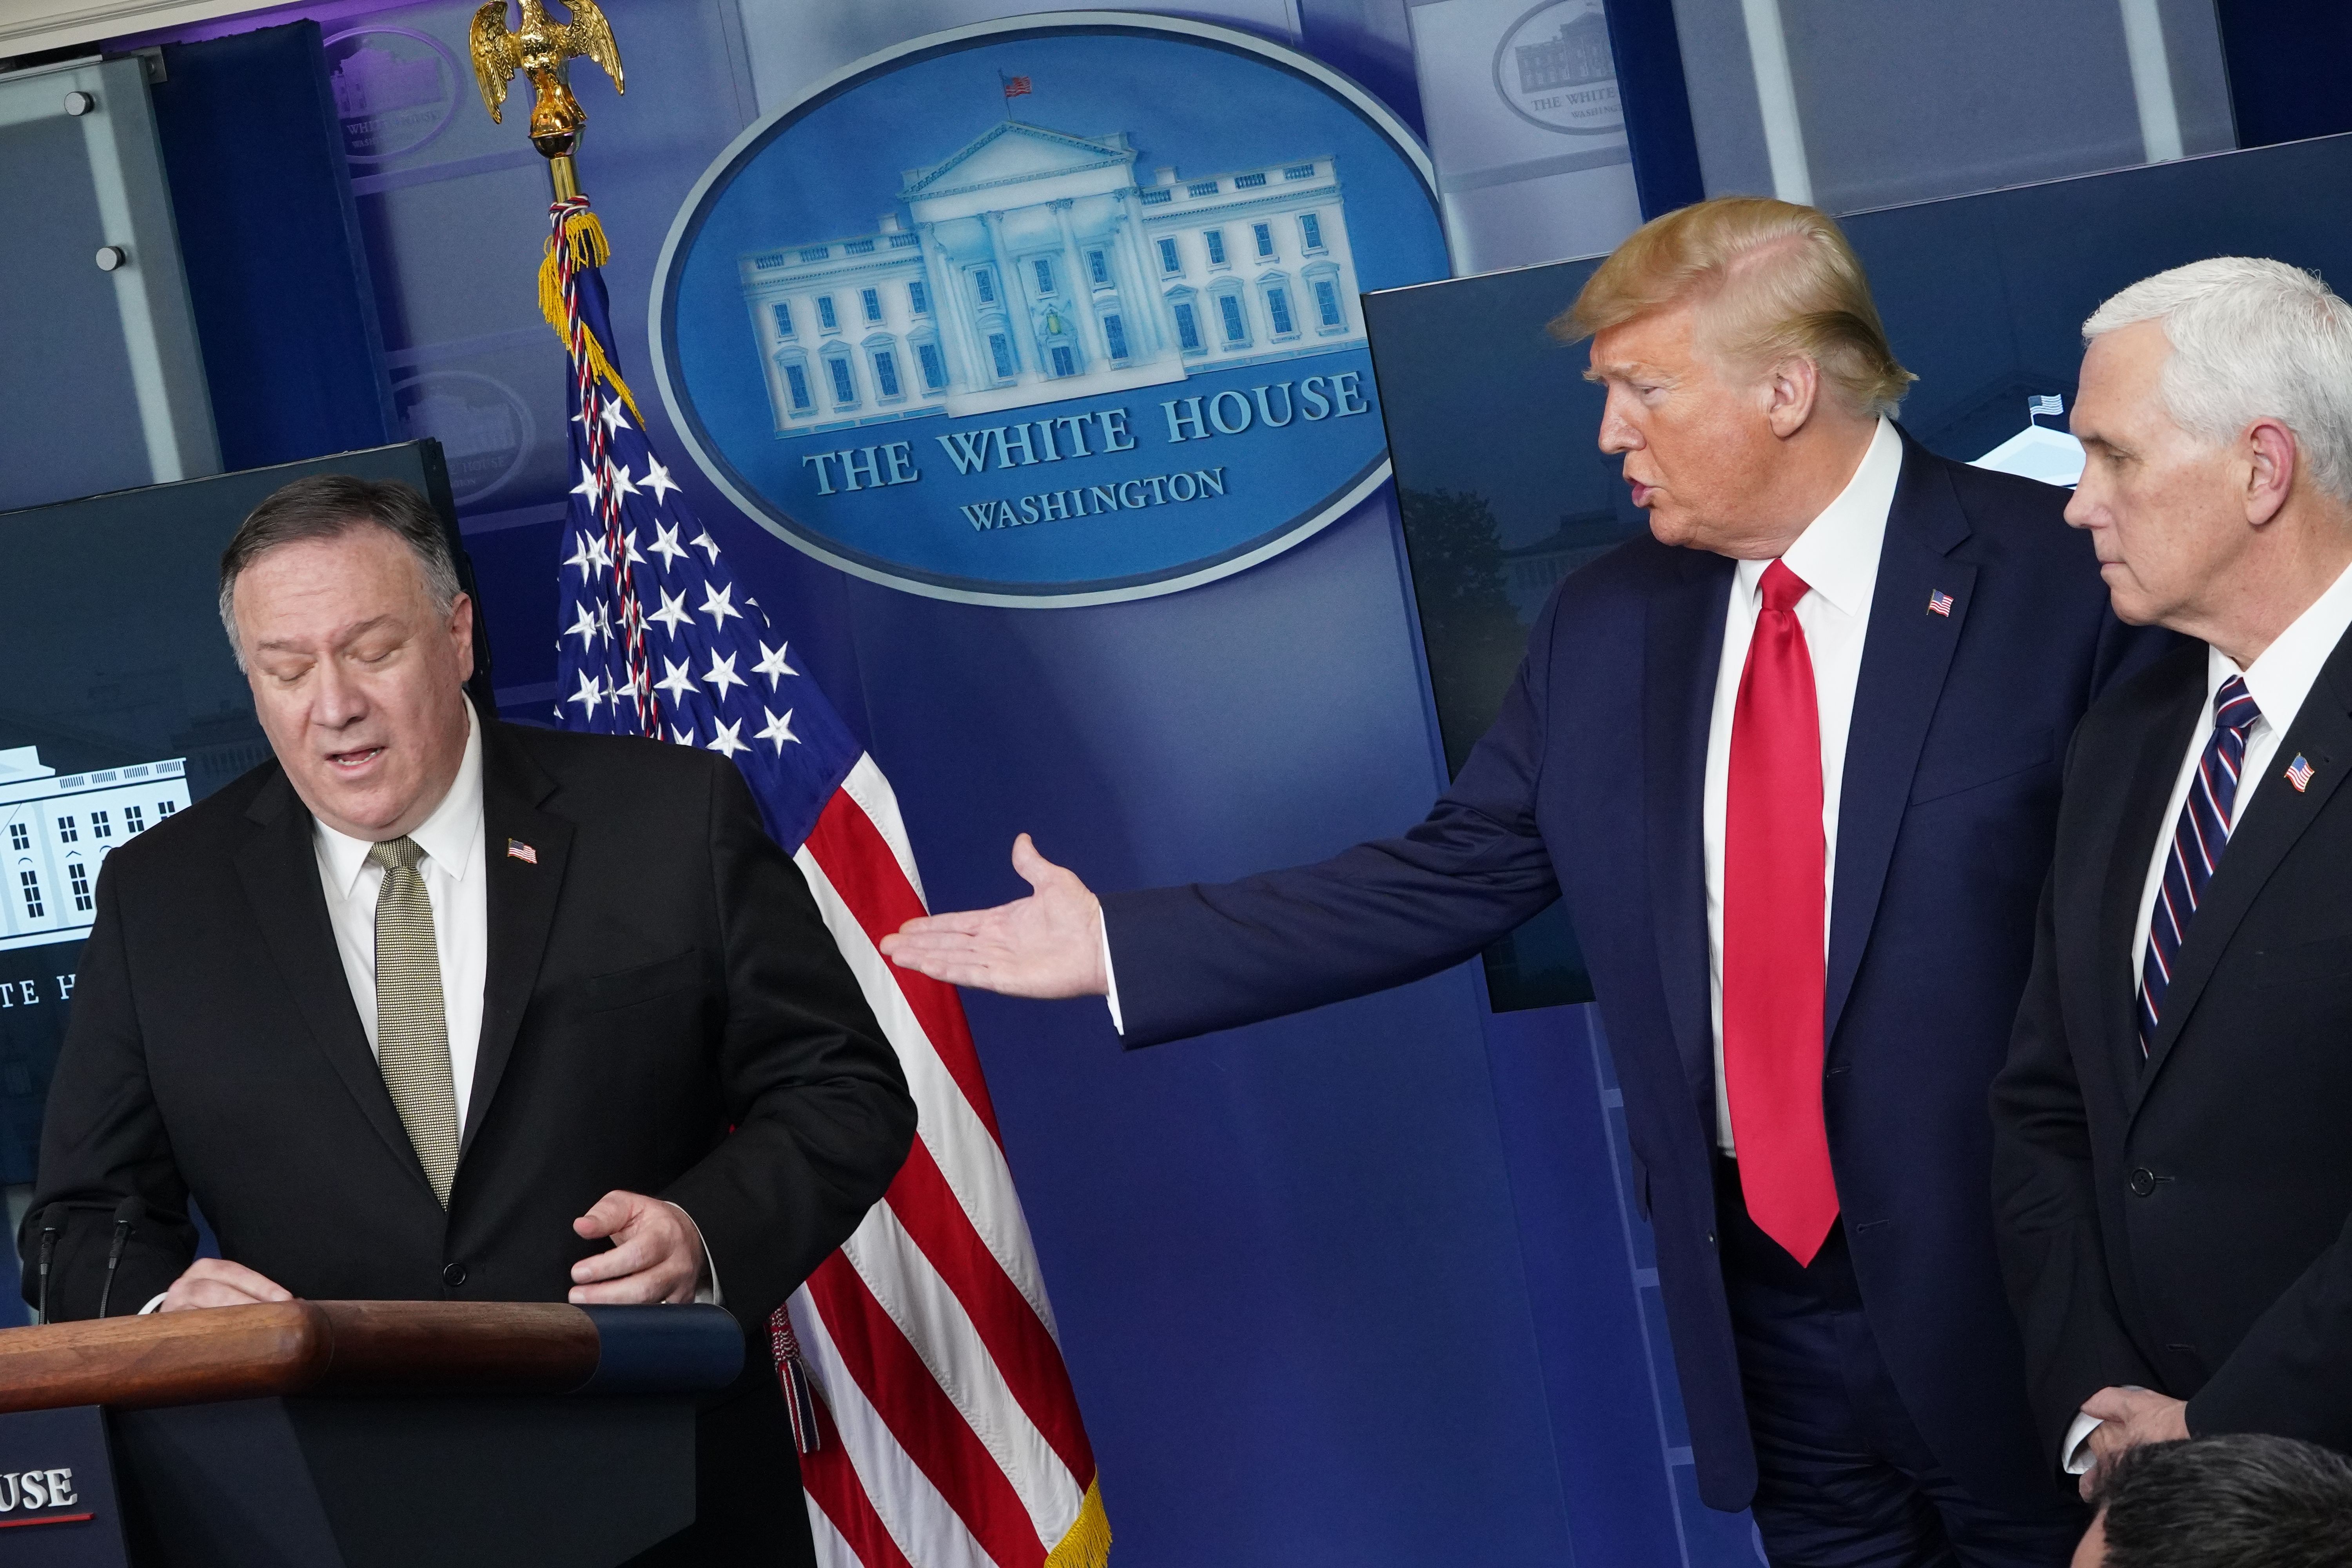 US Secretary of State Mike Pompeo, with US President Donald Trump and US Vice President Mike Pence, speaks during the daily briefing on the novel coronavirus, COVID-19, in the Brady Briefing Room at the White House on April 8, 2020, in Washington, DC. (Photo by MANDEL NGAN/AFP via Getty Images)